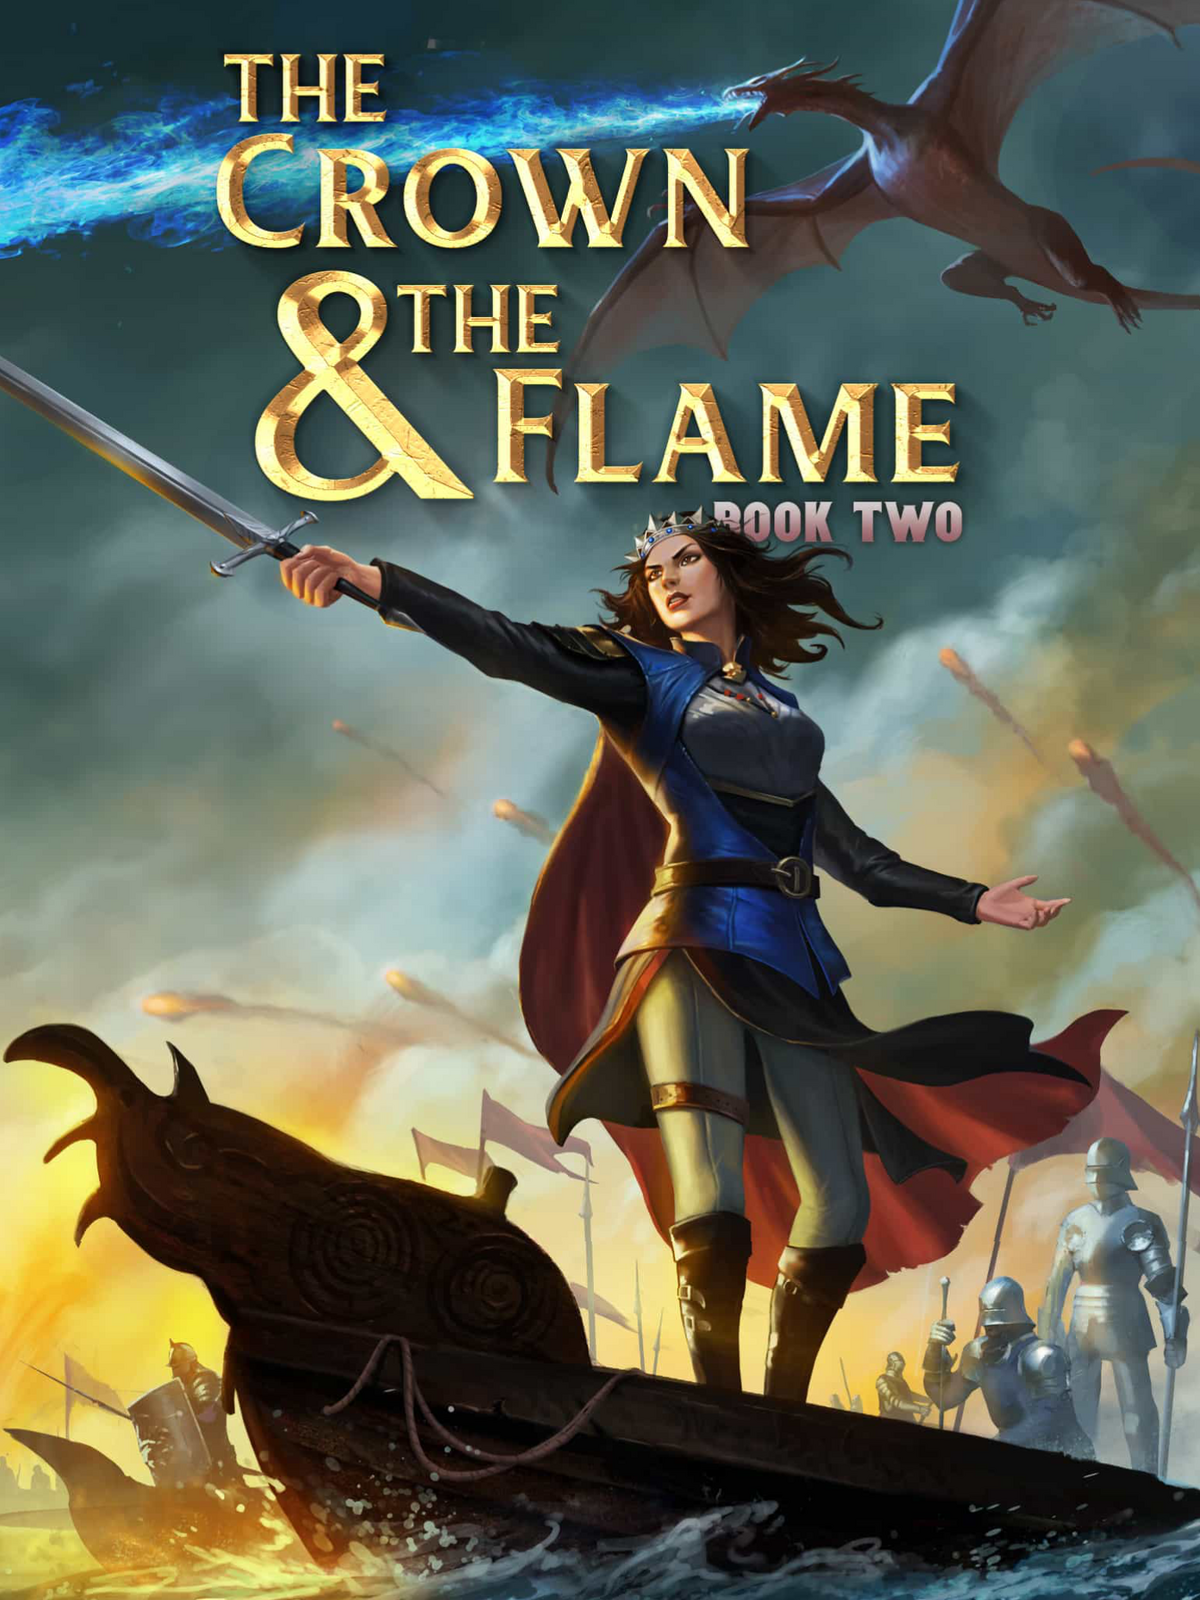 the-crown-and-the-flame-book-3-review-haylaieakram